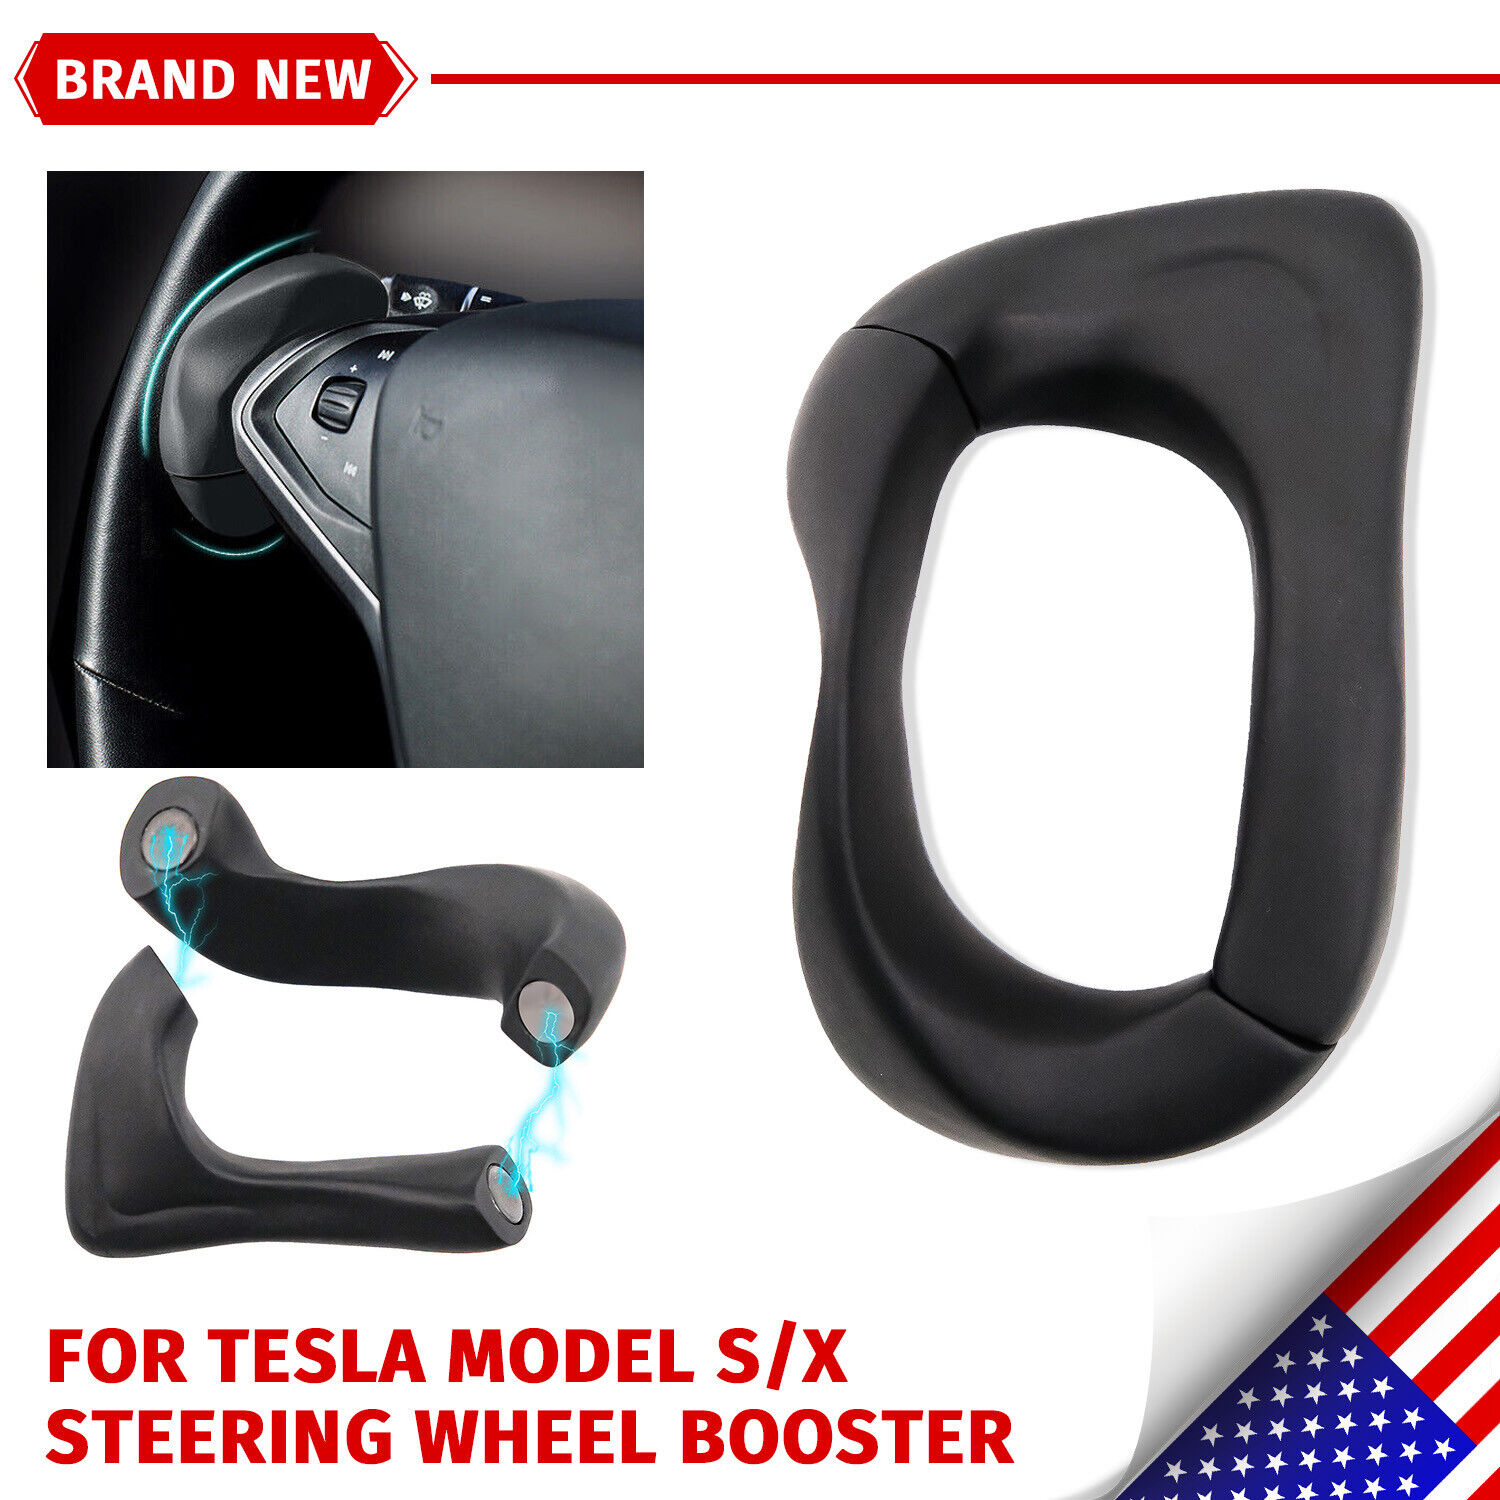 Steering Wheel Booster Weight Accessories Counterweight Ring for Tesla Model S X